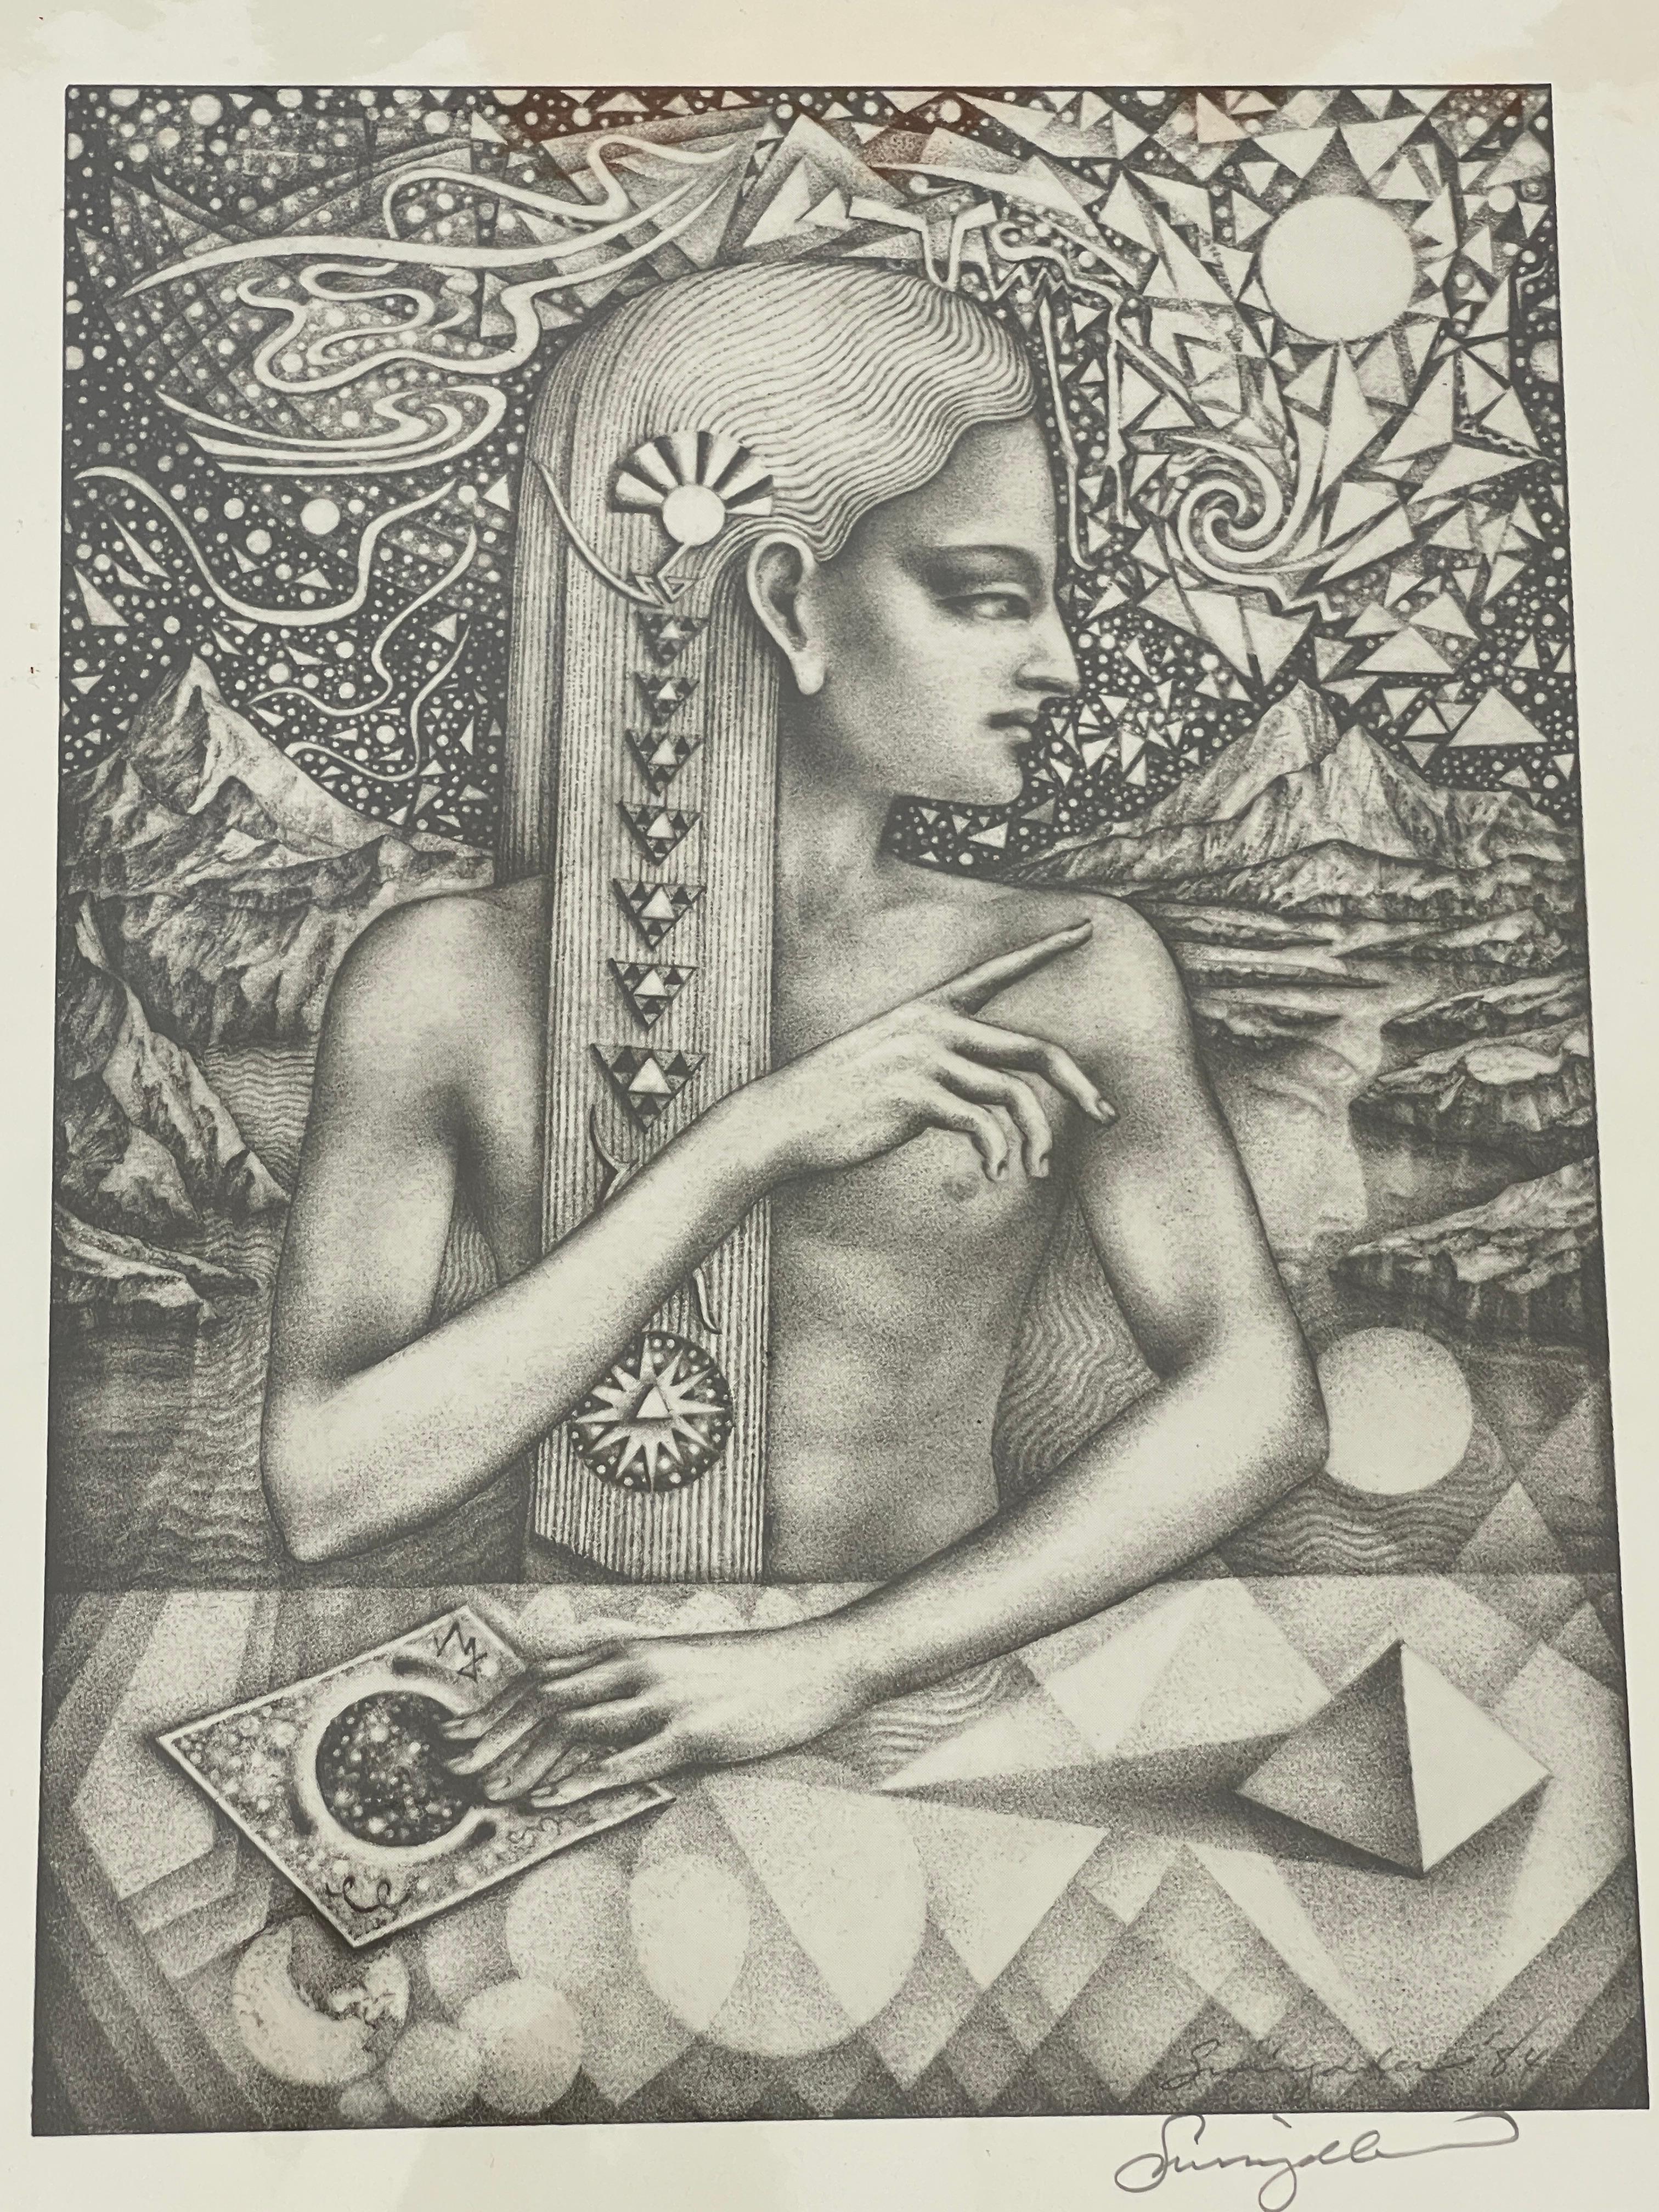 Visionary Art of John Swingdler 'Oracle' and 'The Wanderers' Reproduction Signed in Pencil